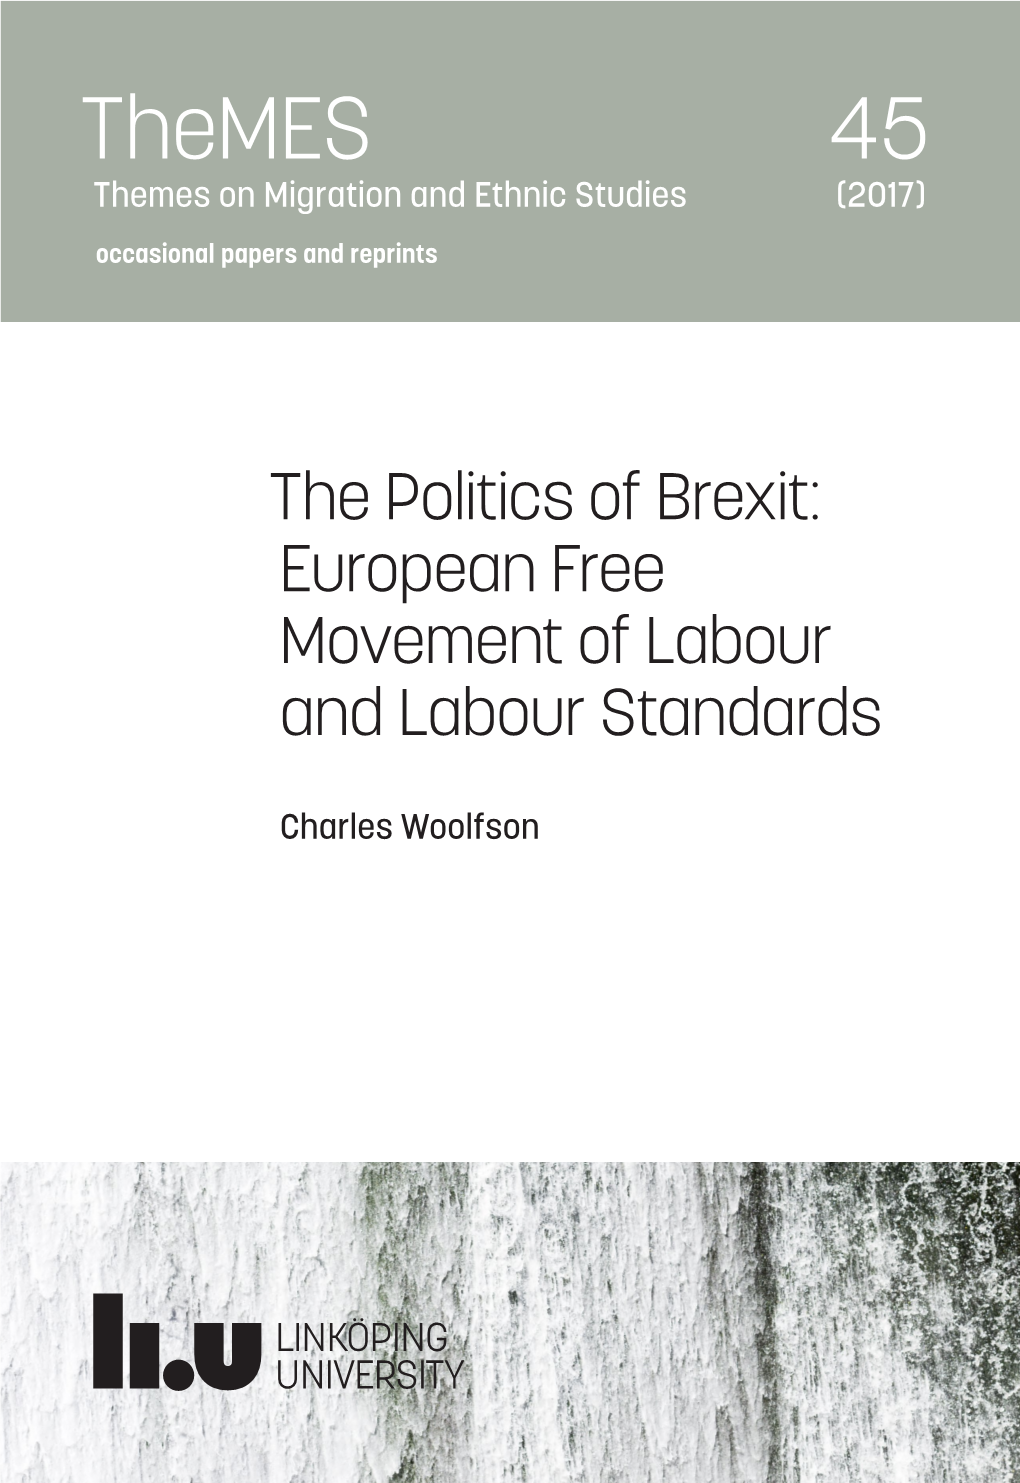 The Politics of Brexit: European Free Movement of Labour and Labour Standards